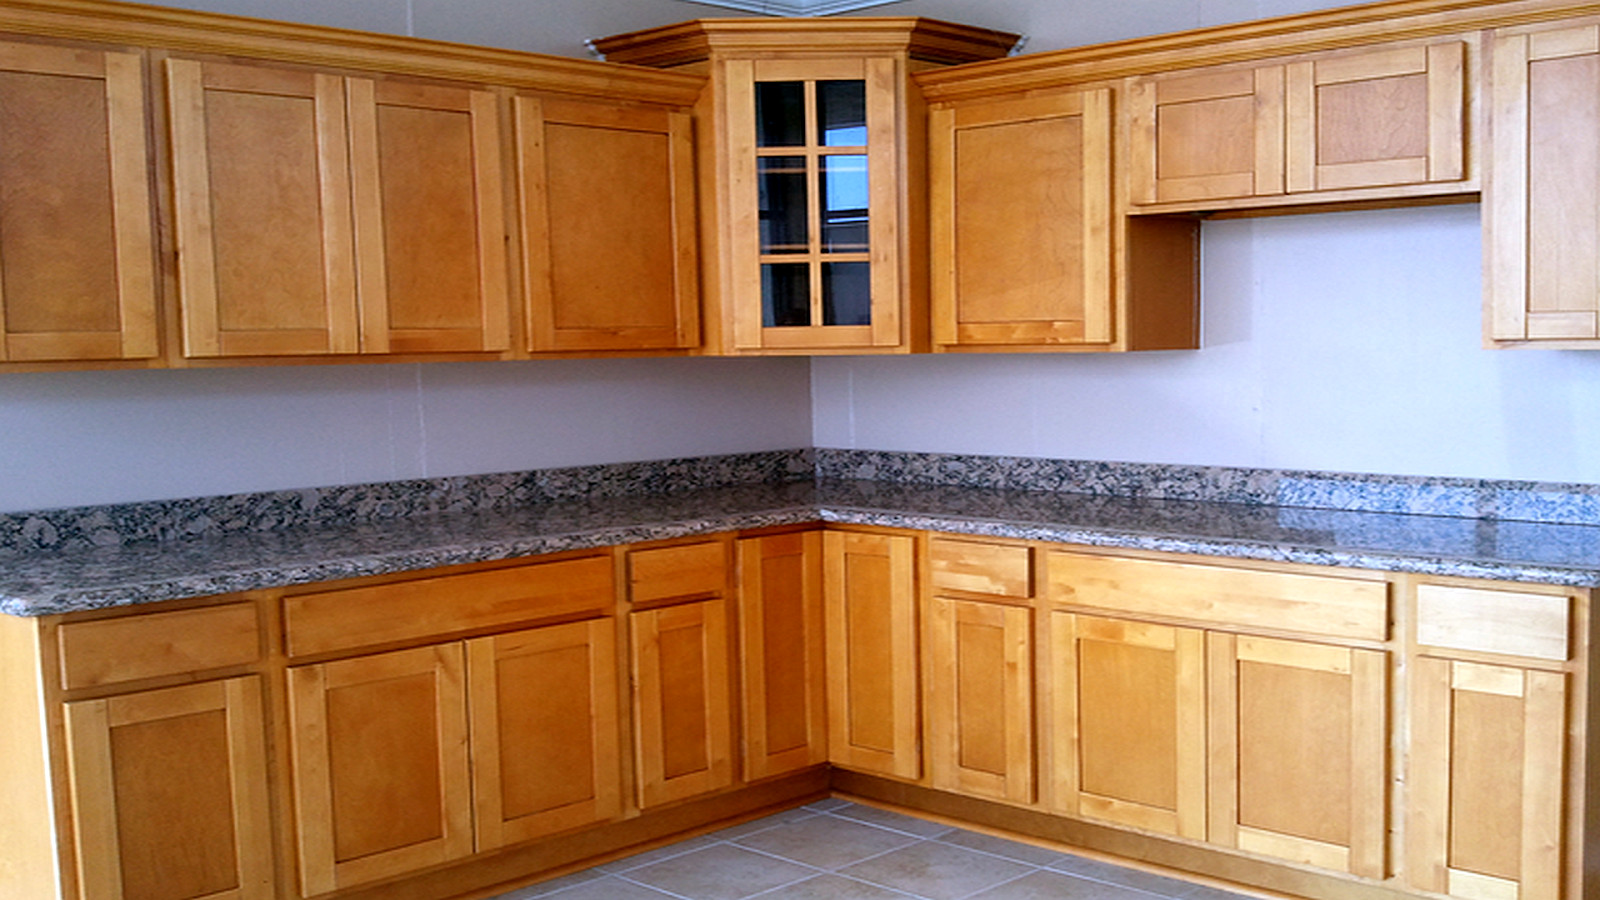 Home Depot Unfinished Kitchen Cabinets
 how to finish unfinished kitchen cabinets